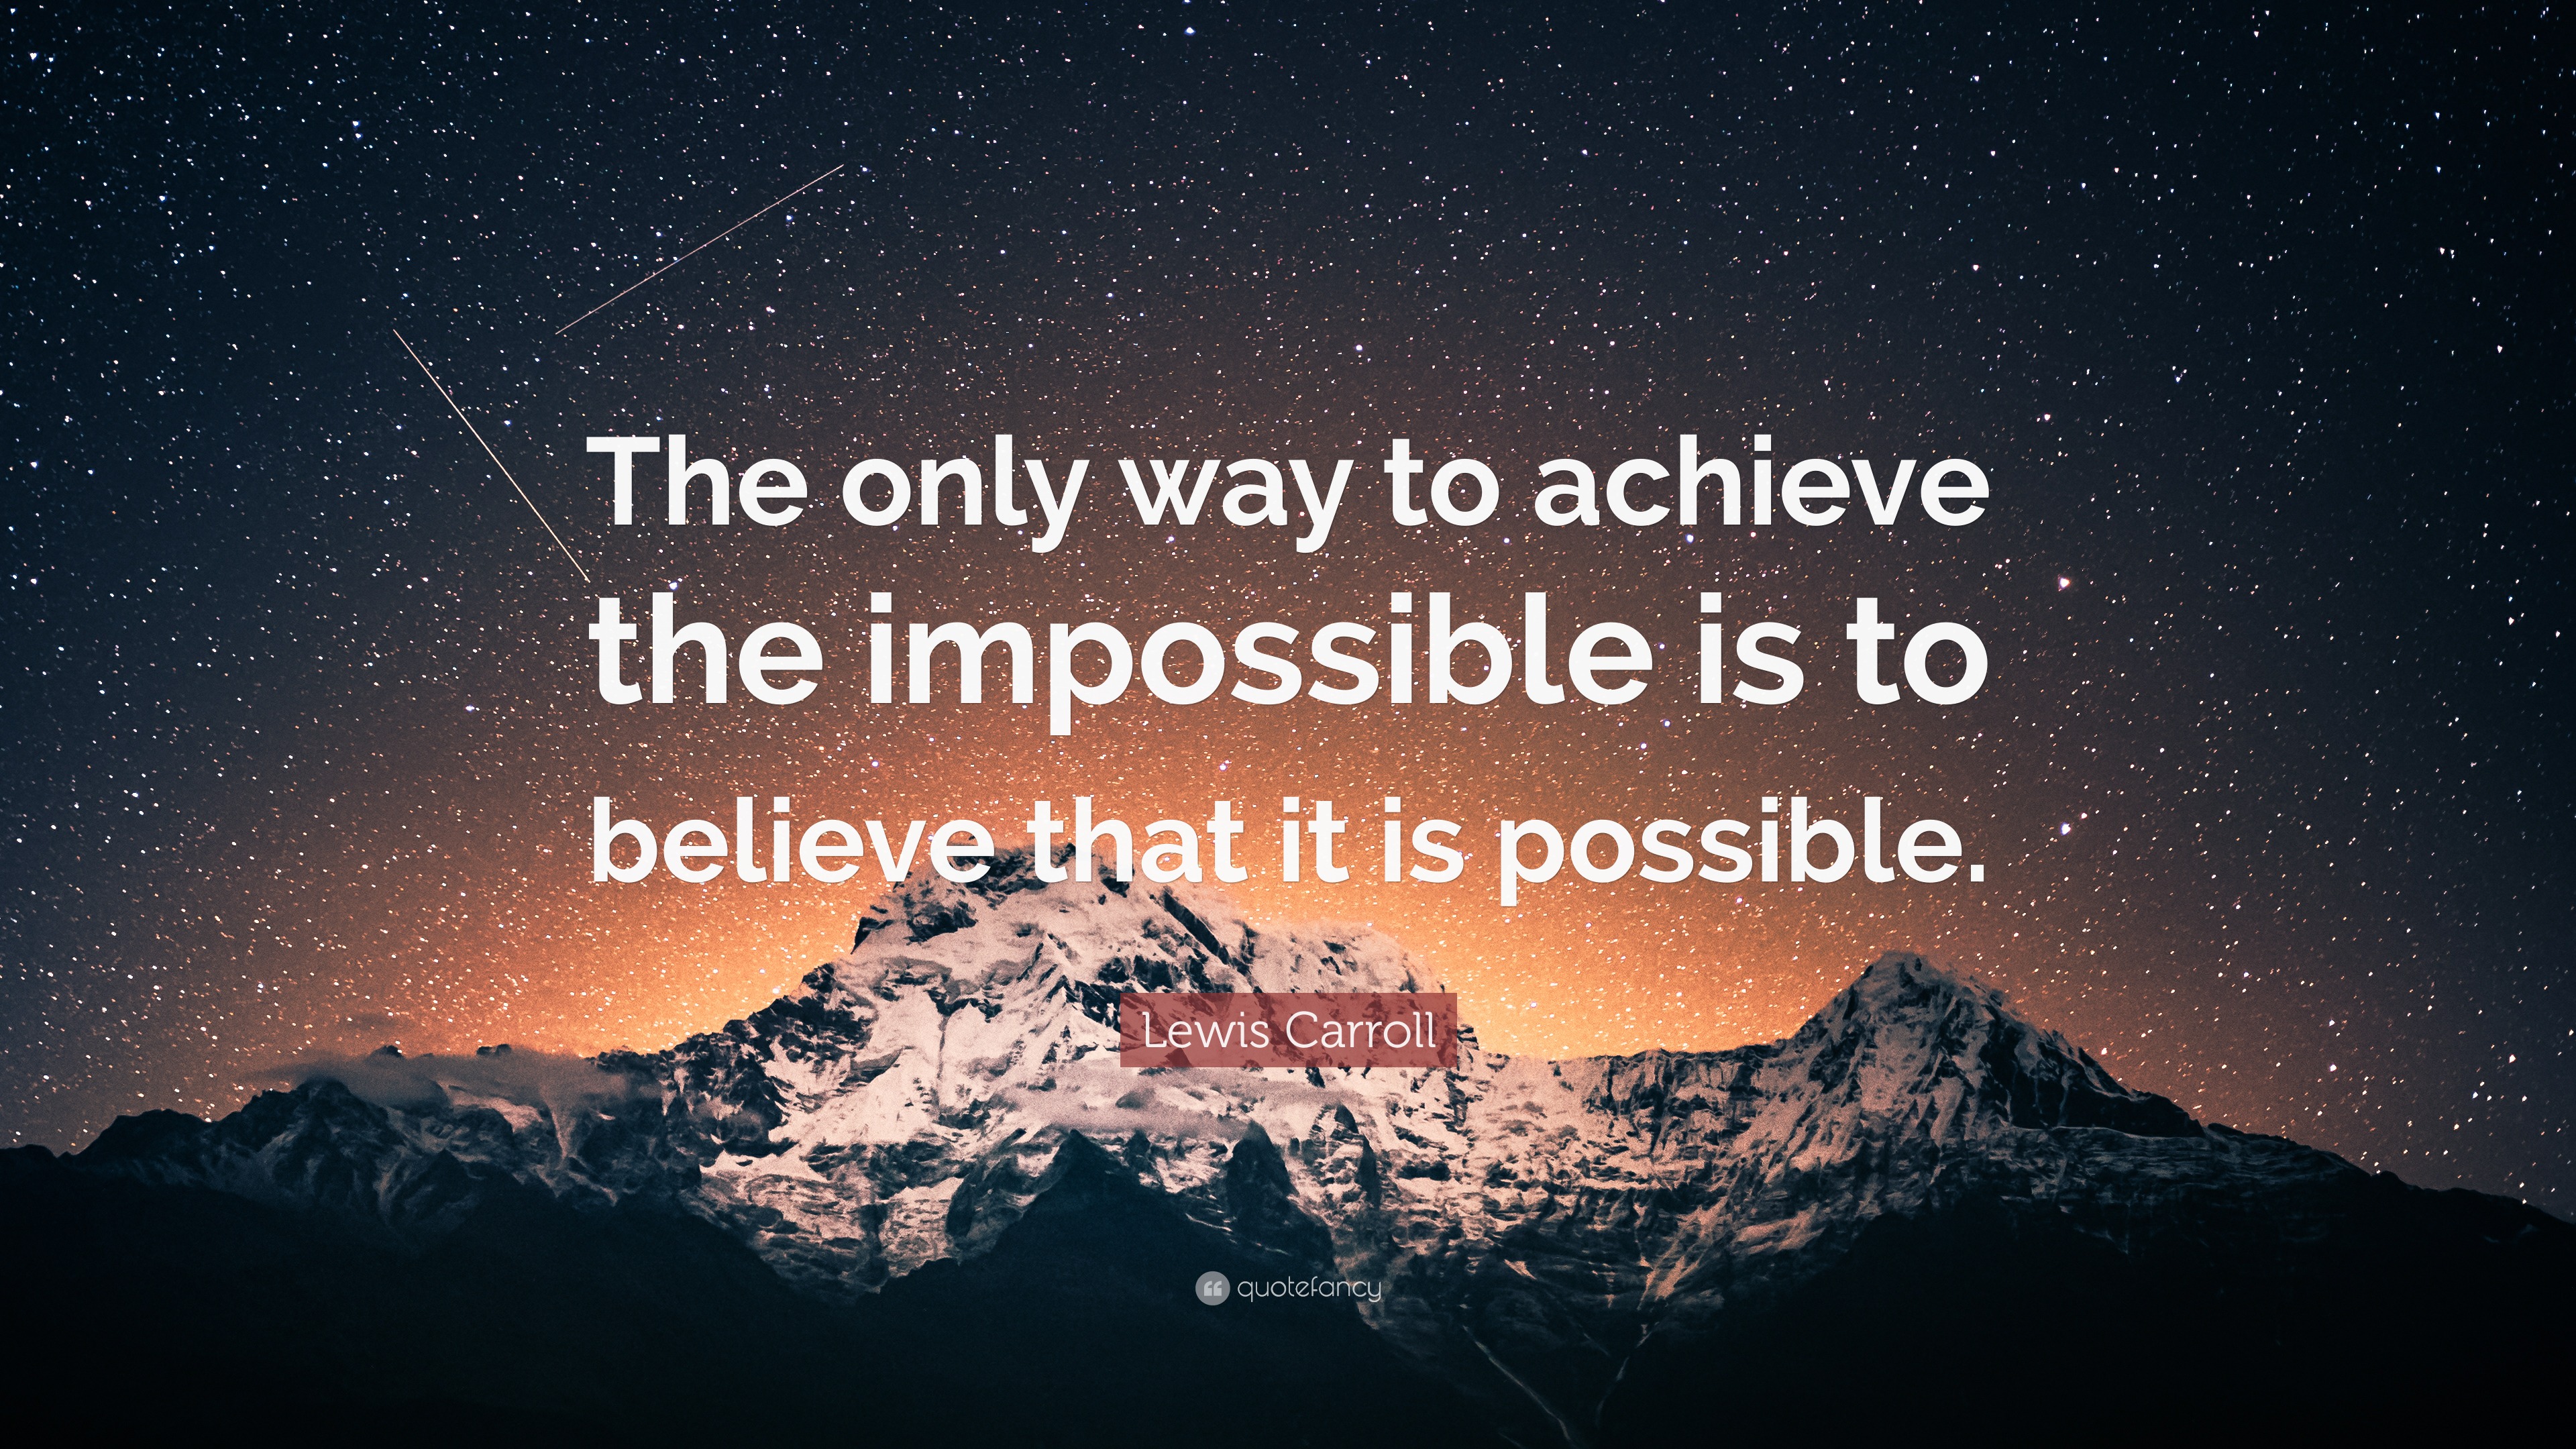 Lewis Carroll Quote: “The only way to achieve the impossible is to ...